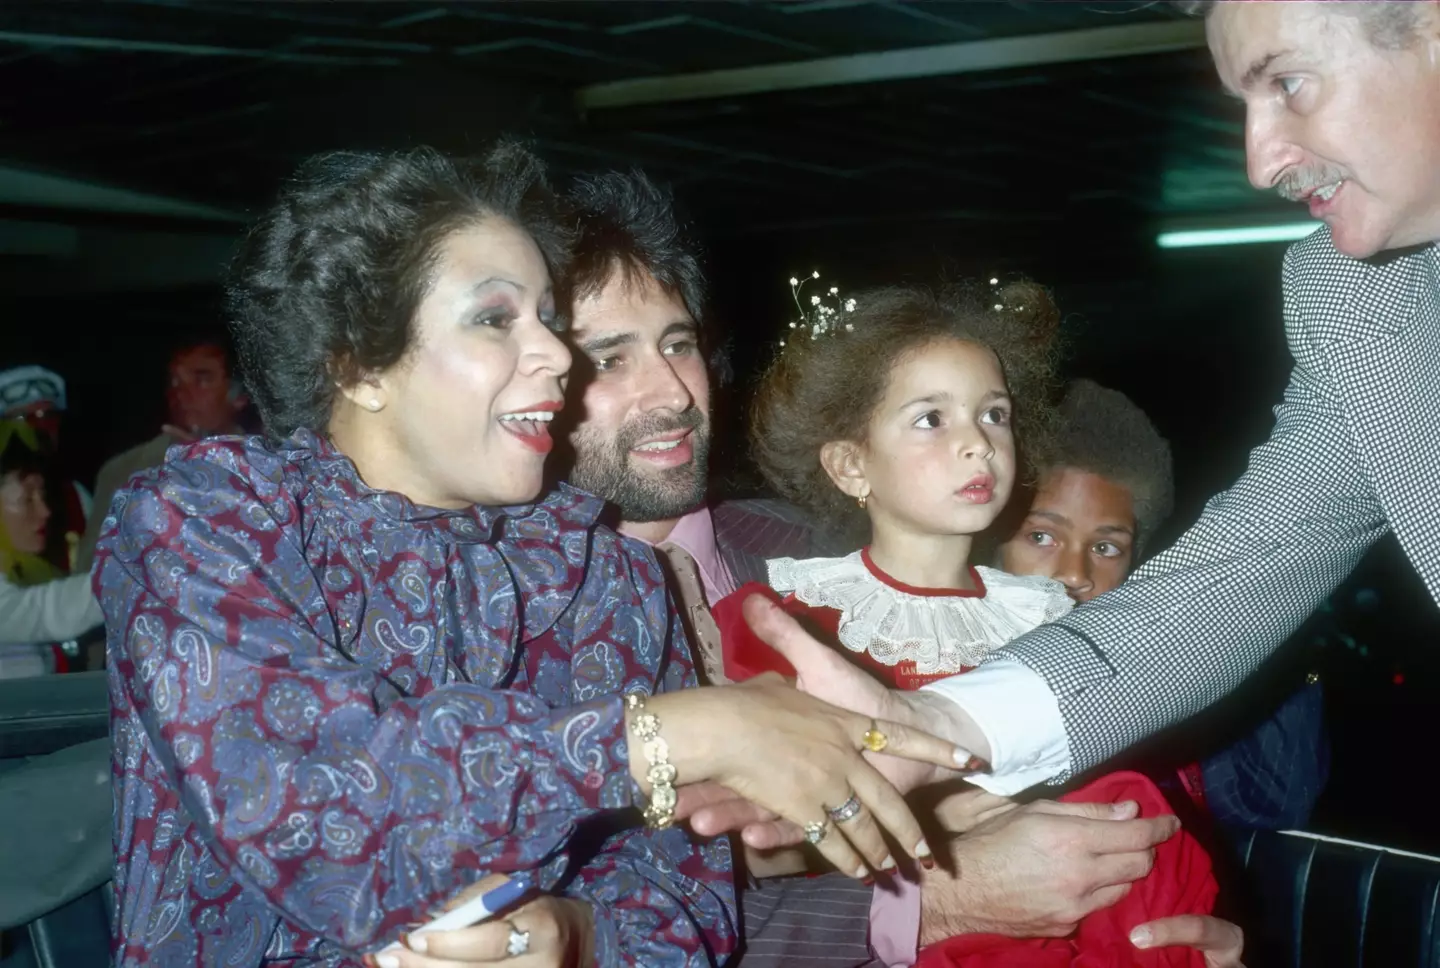 A young Maya Rudolph seen with her parents, Richard Rudolph and Minnie Riperton. (Michael Ochs Archive/Getty Images)